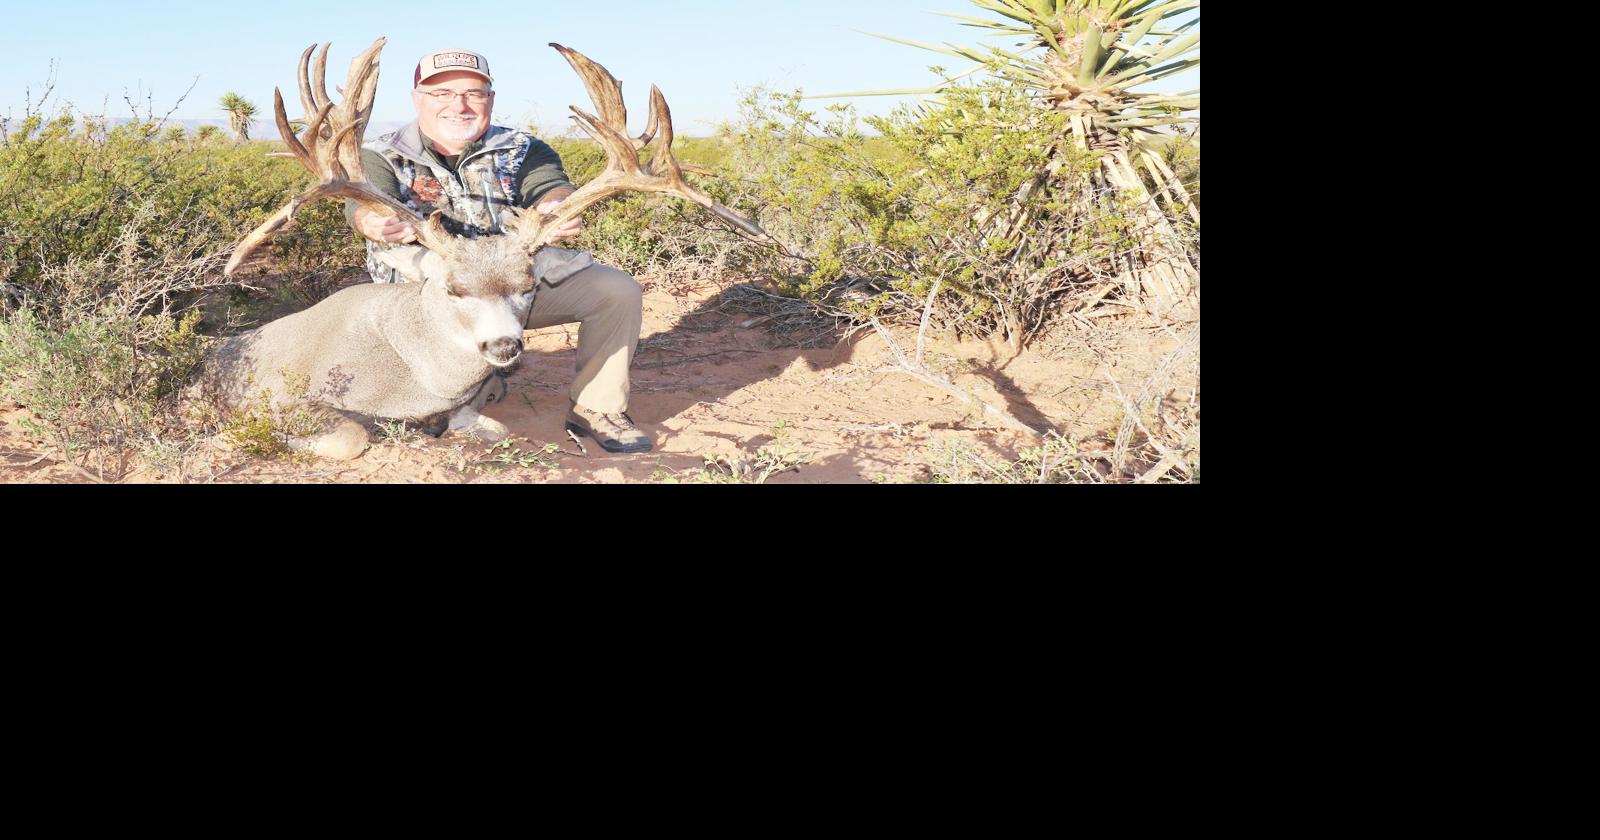 Magnificent Mulie: West Texas hunter recounts exciting spot-and-stalk chase  with potential state record buck, Sports